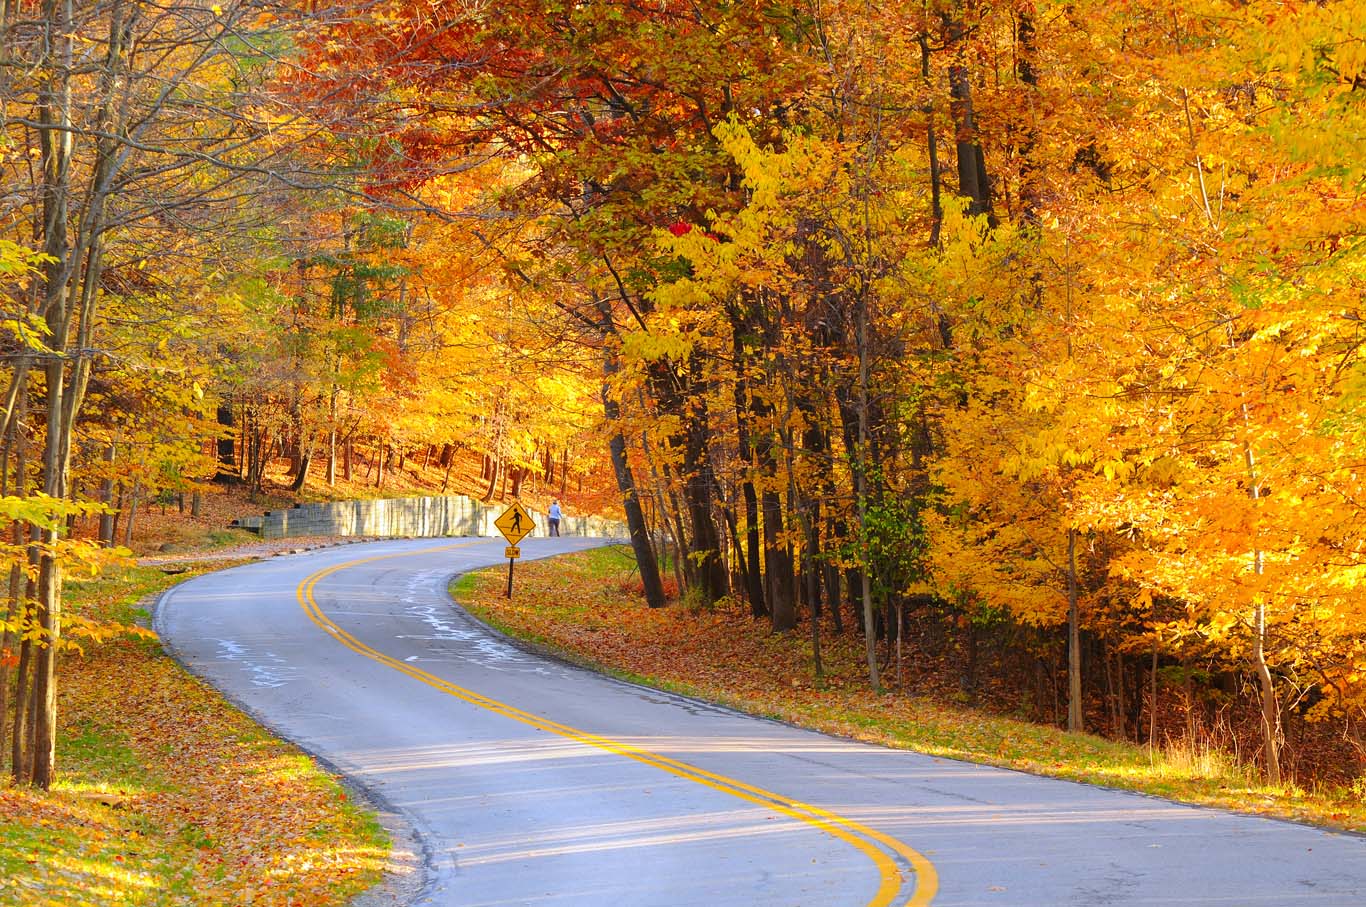 A curving autumn road with a hiker in the far distance